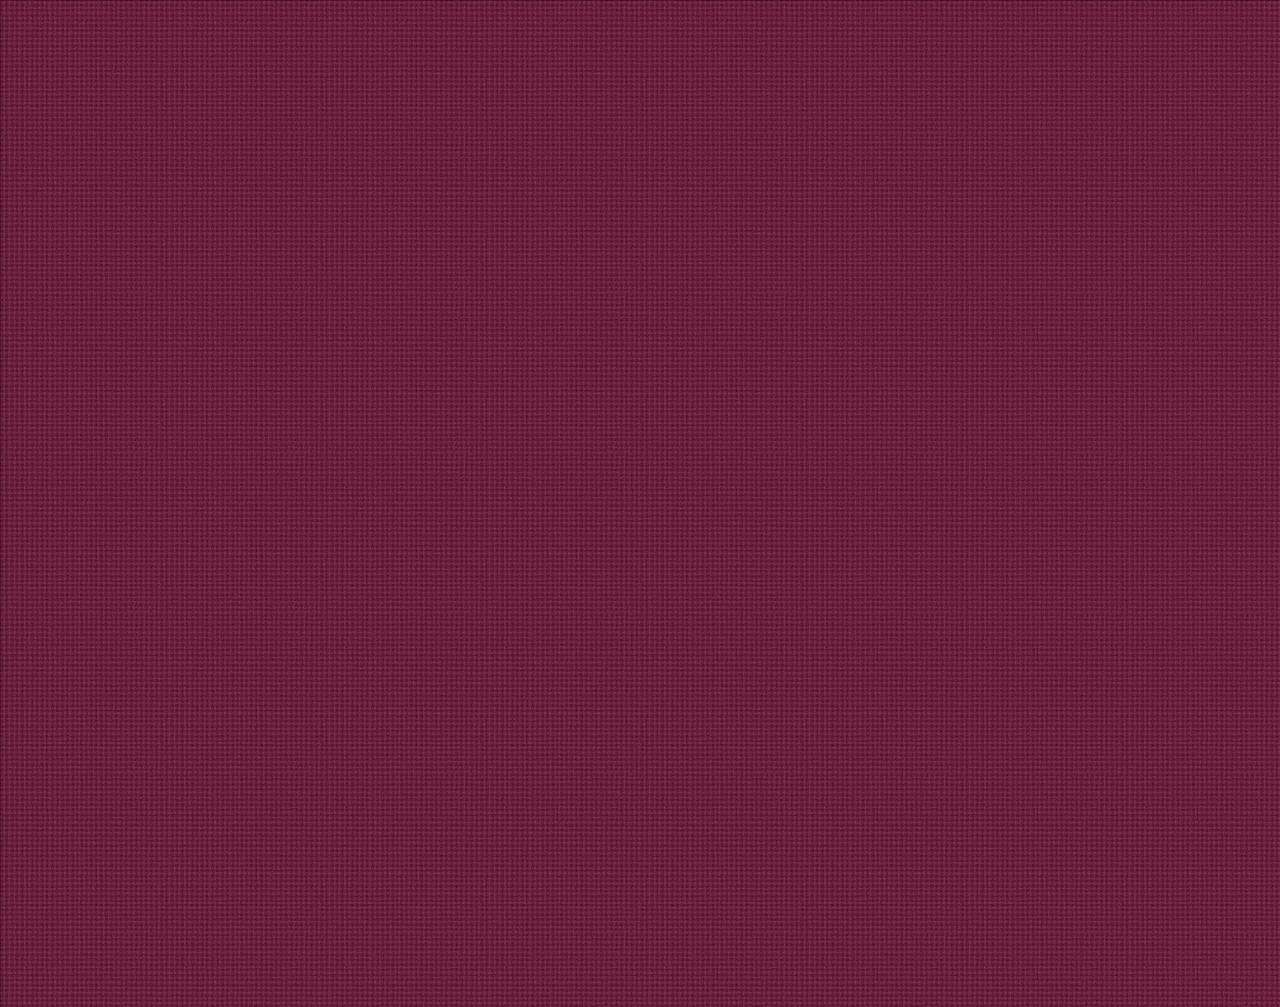 1280x1007px Download Burgundy HD wallpapers for free 42